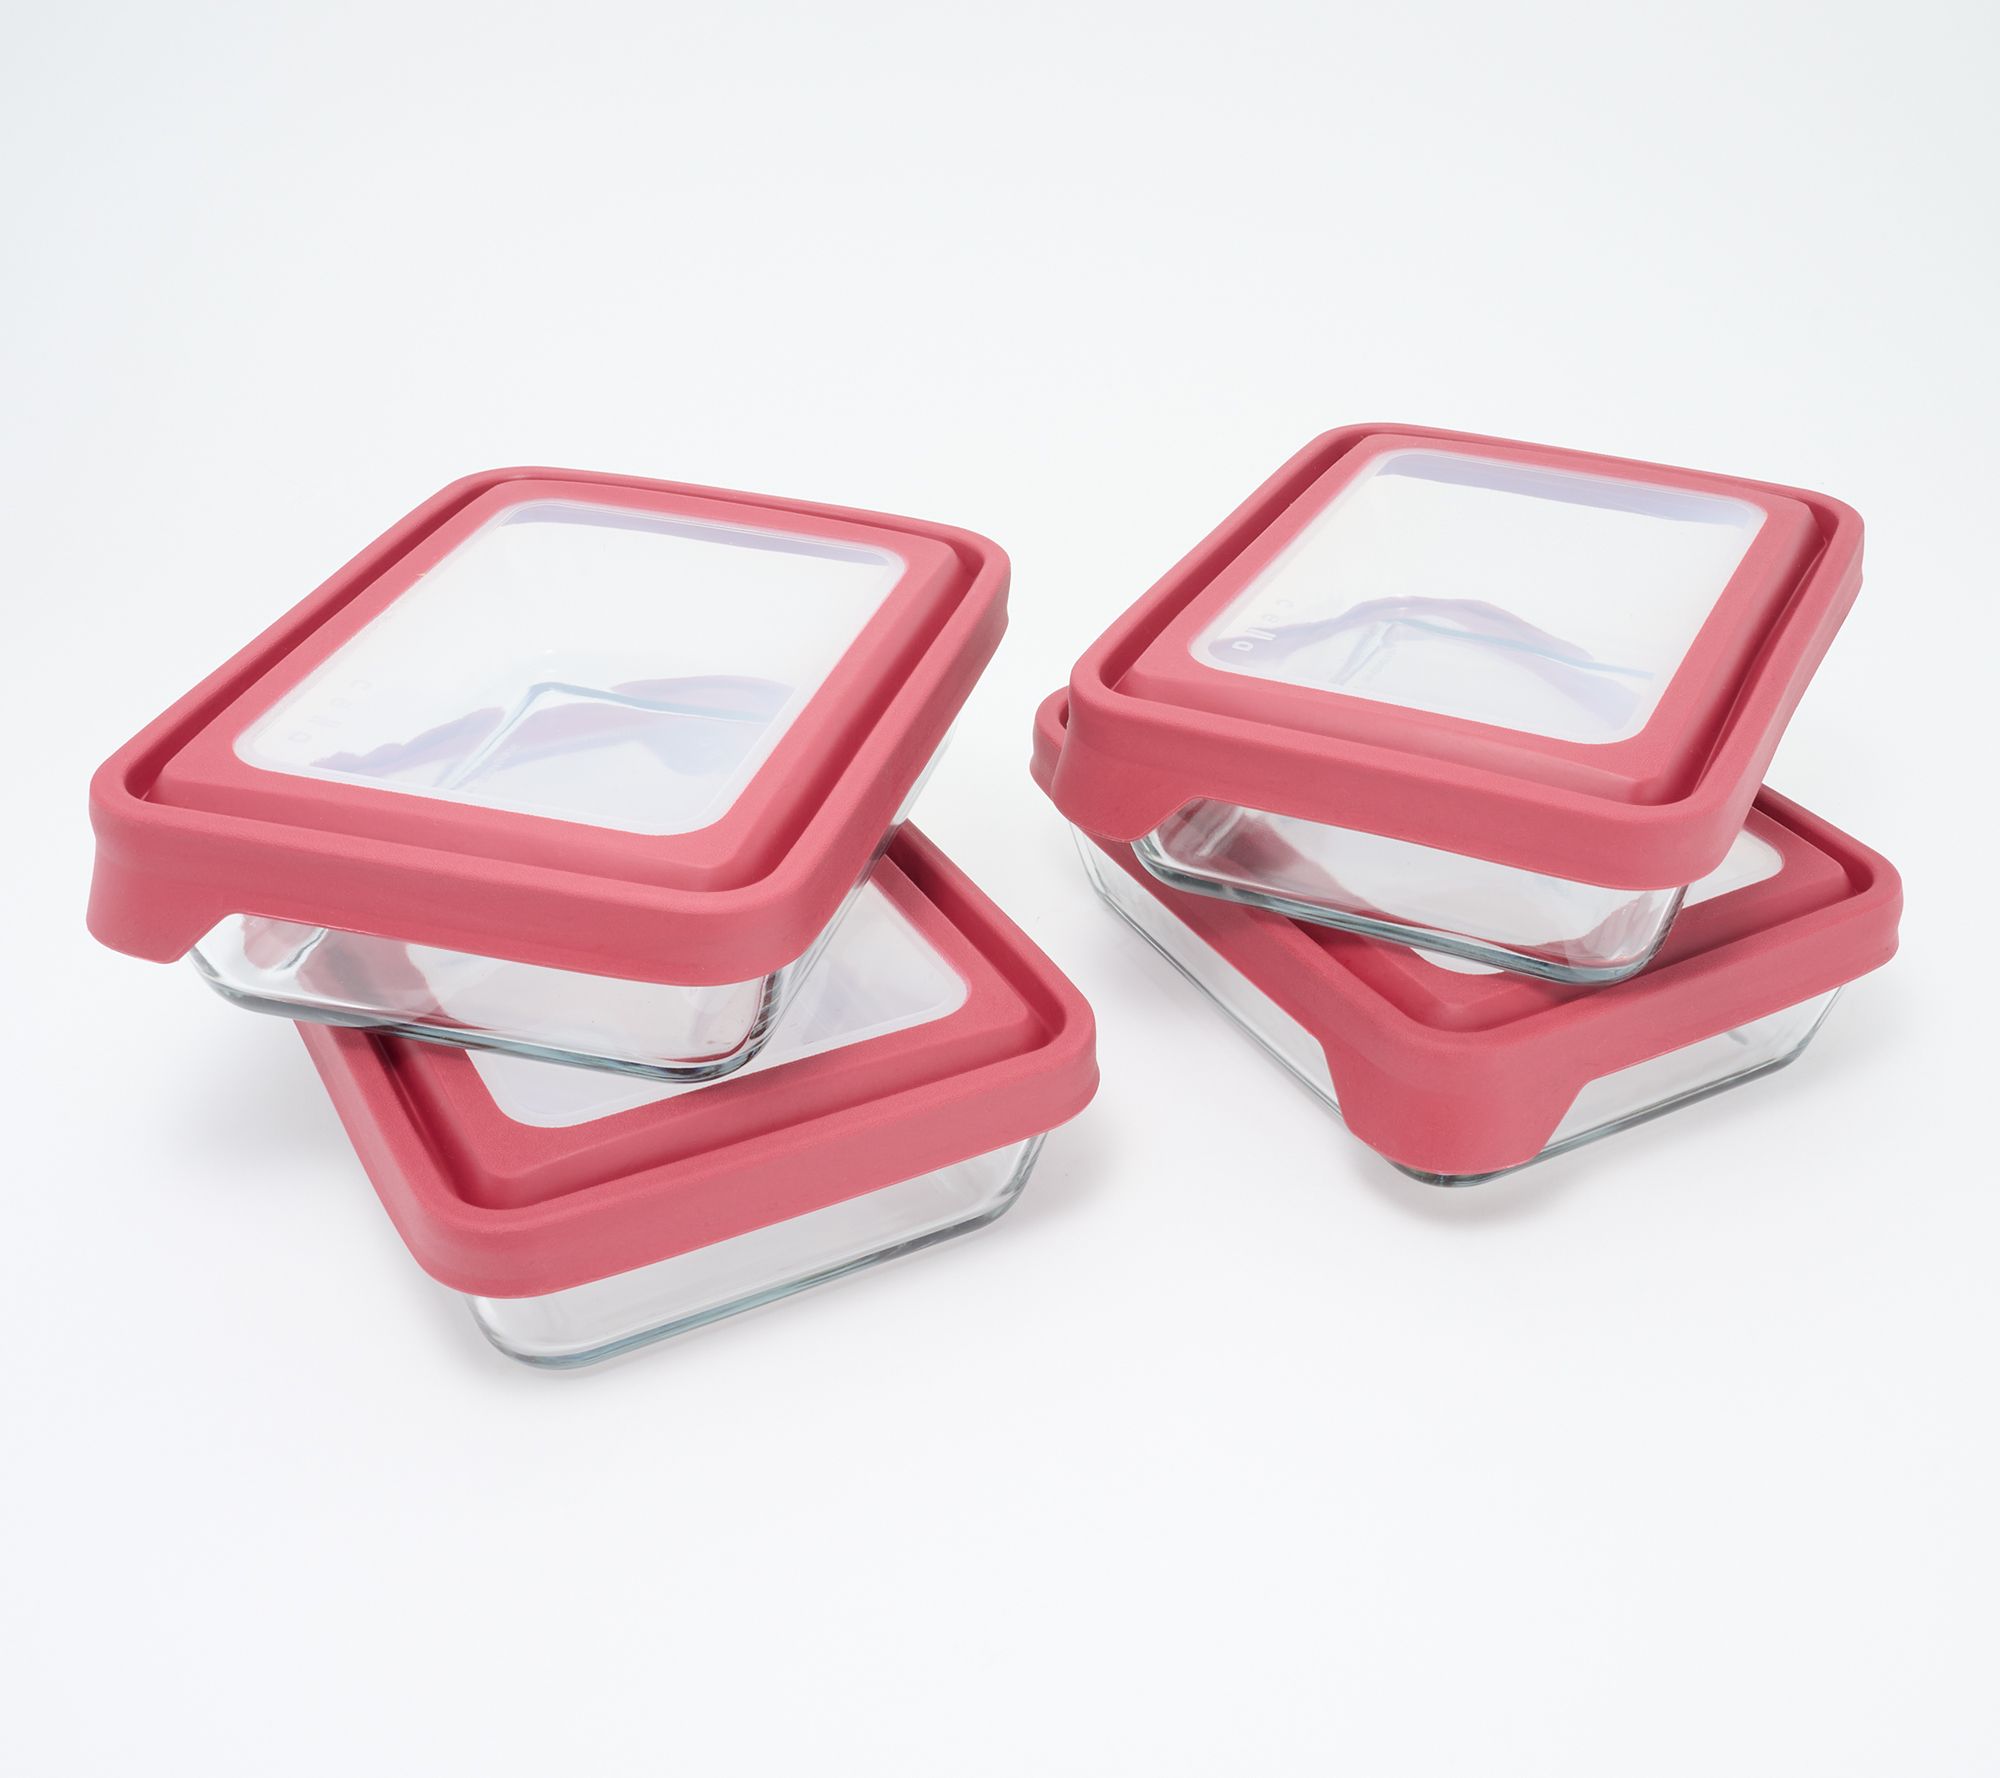 Anchor Hocking TrueSeal Food Storage Containers Review: Nothing